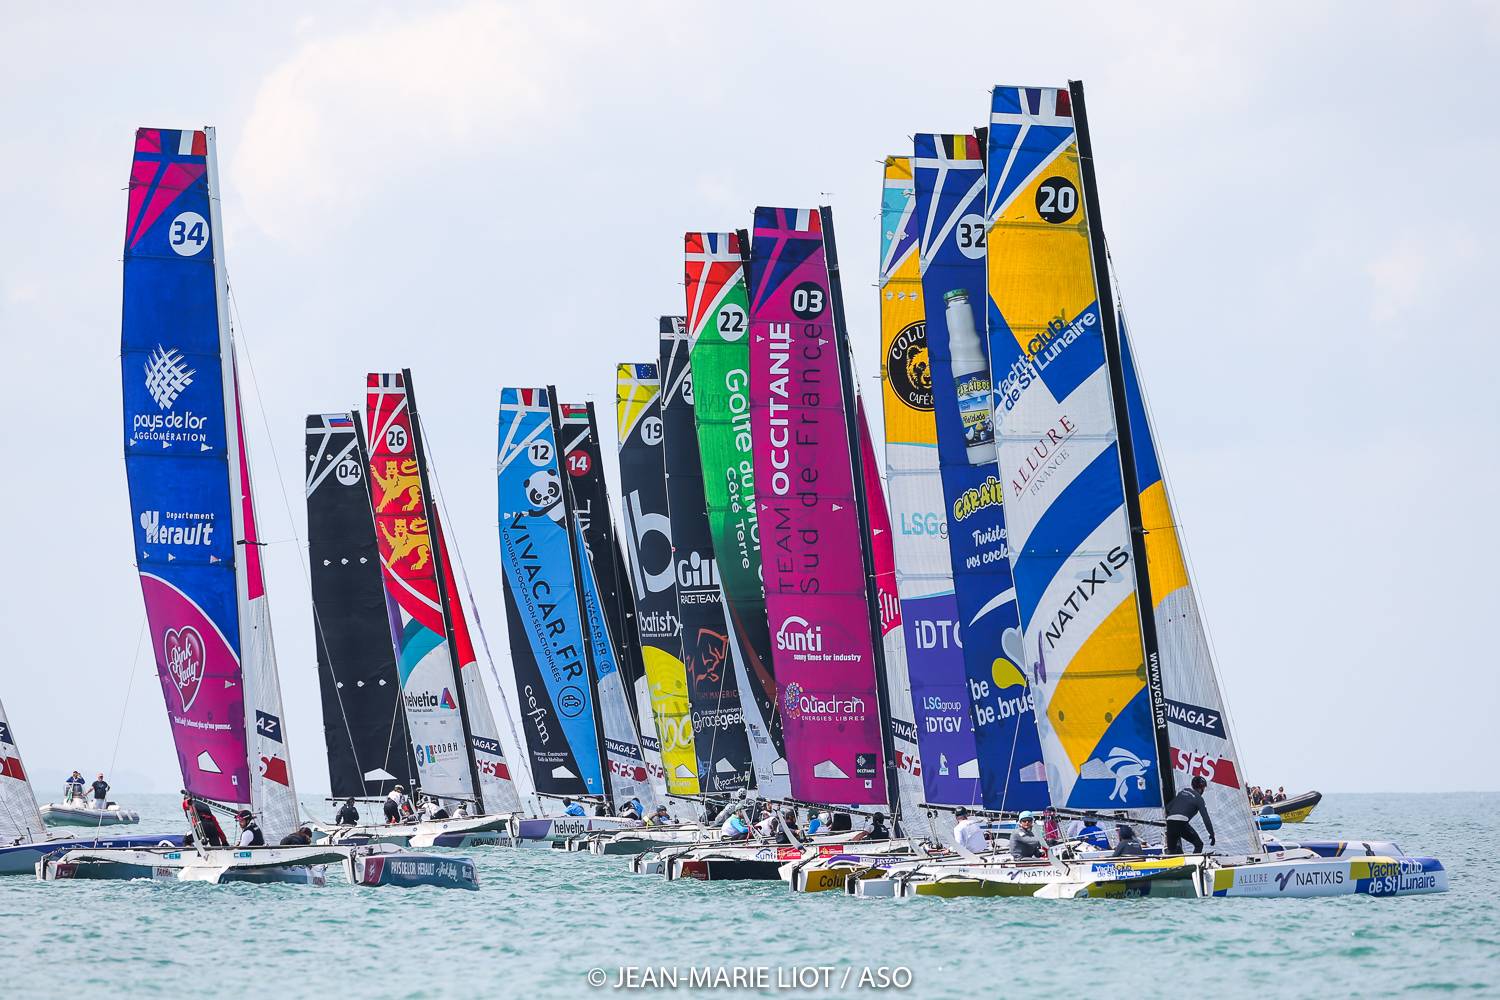  Diam 24  Tour de France à la Voile  Act 3  Jullouville FRA Day 6, no change on top of rankings on day one of Act 3